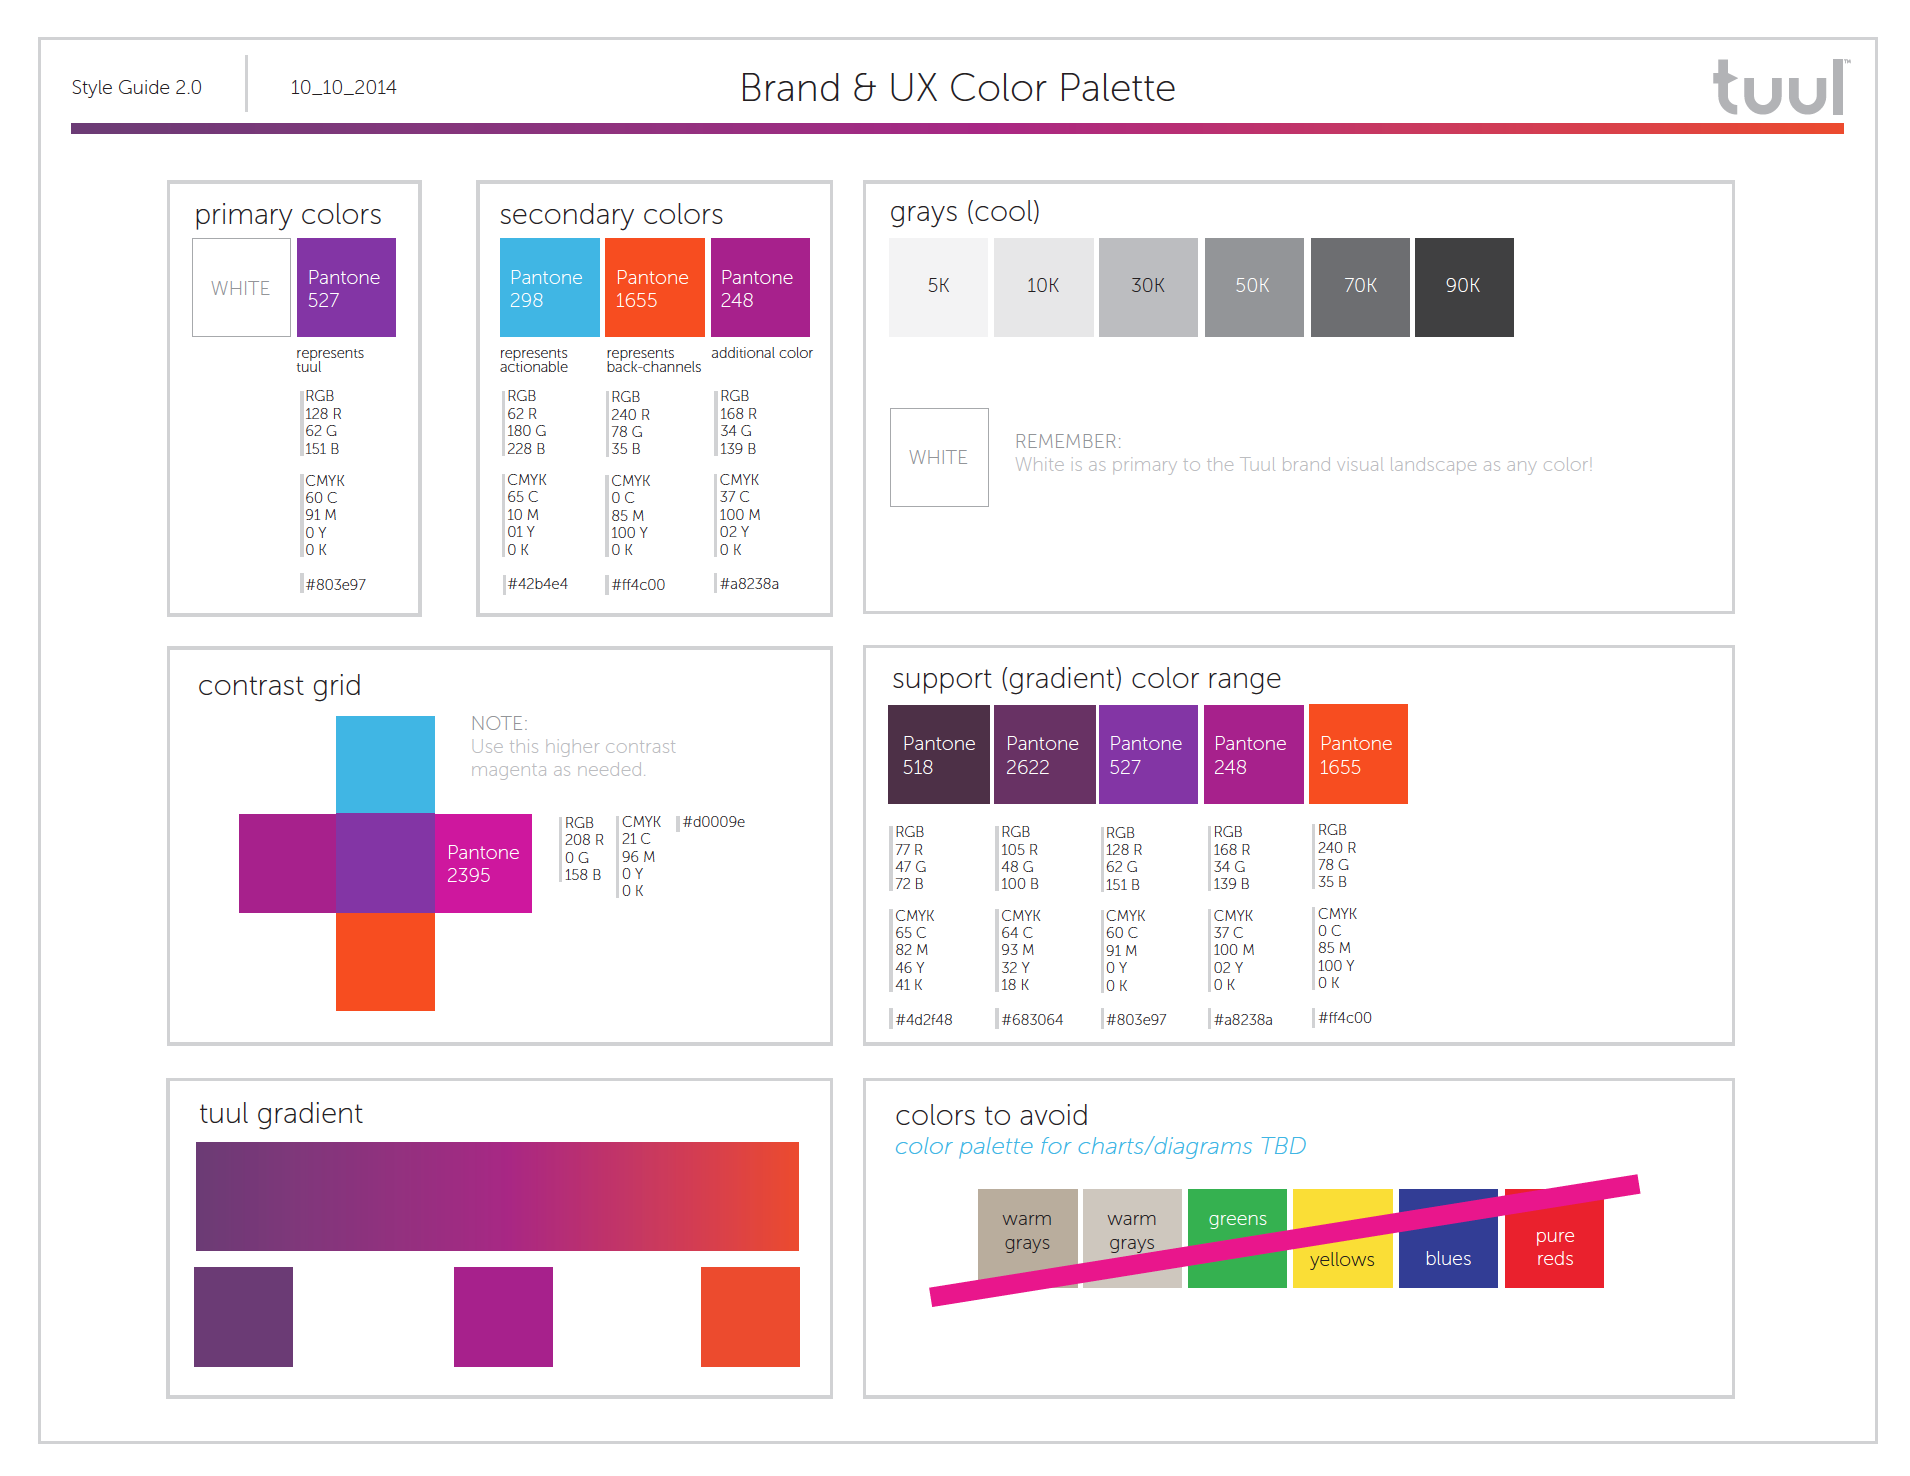 tuul-brand&ux-color-palette.png